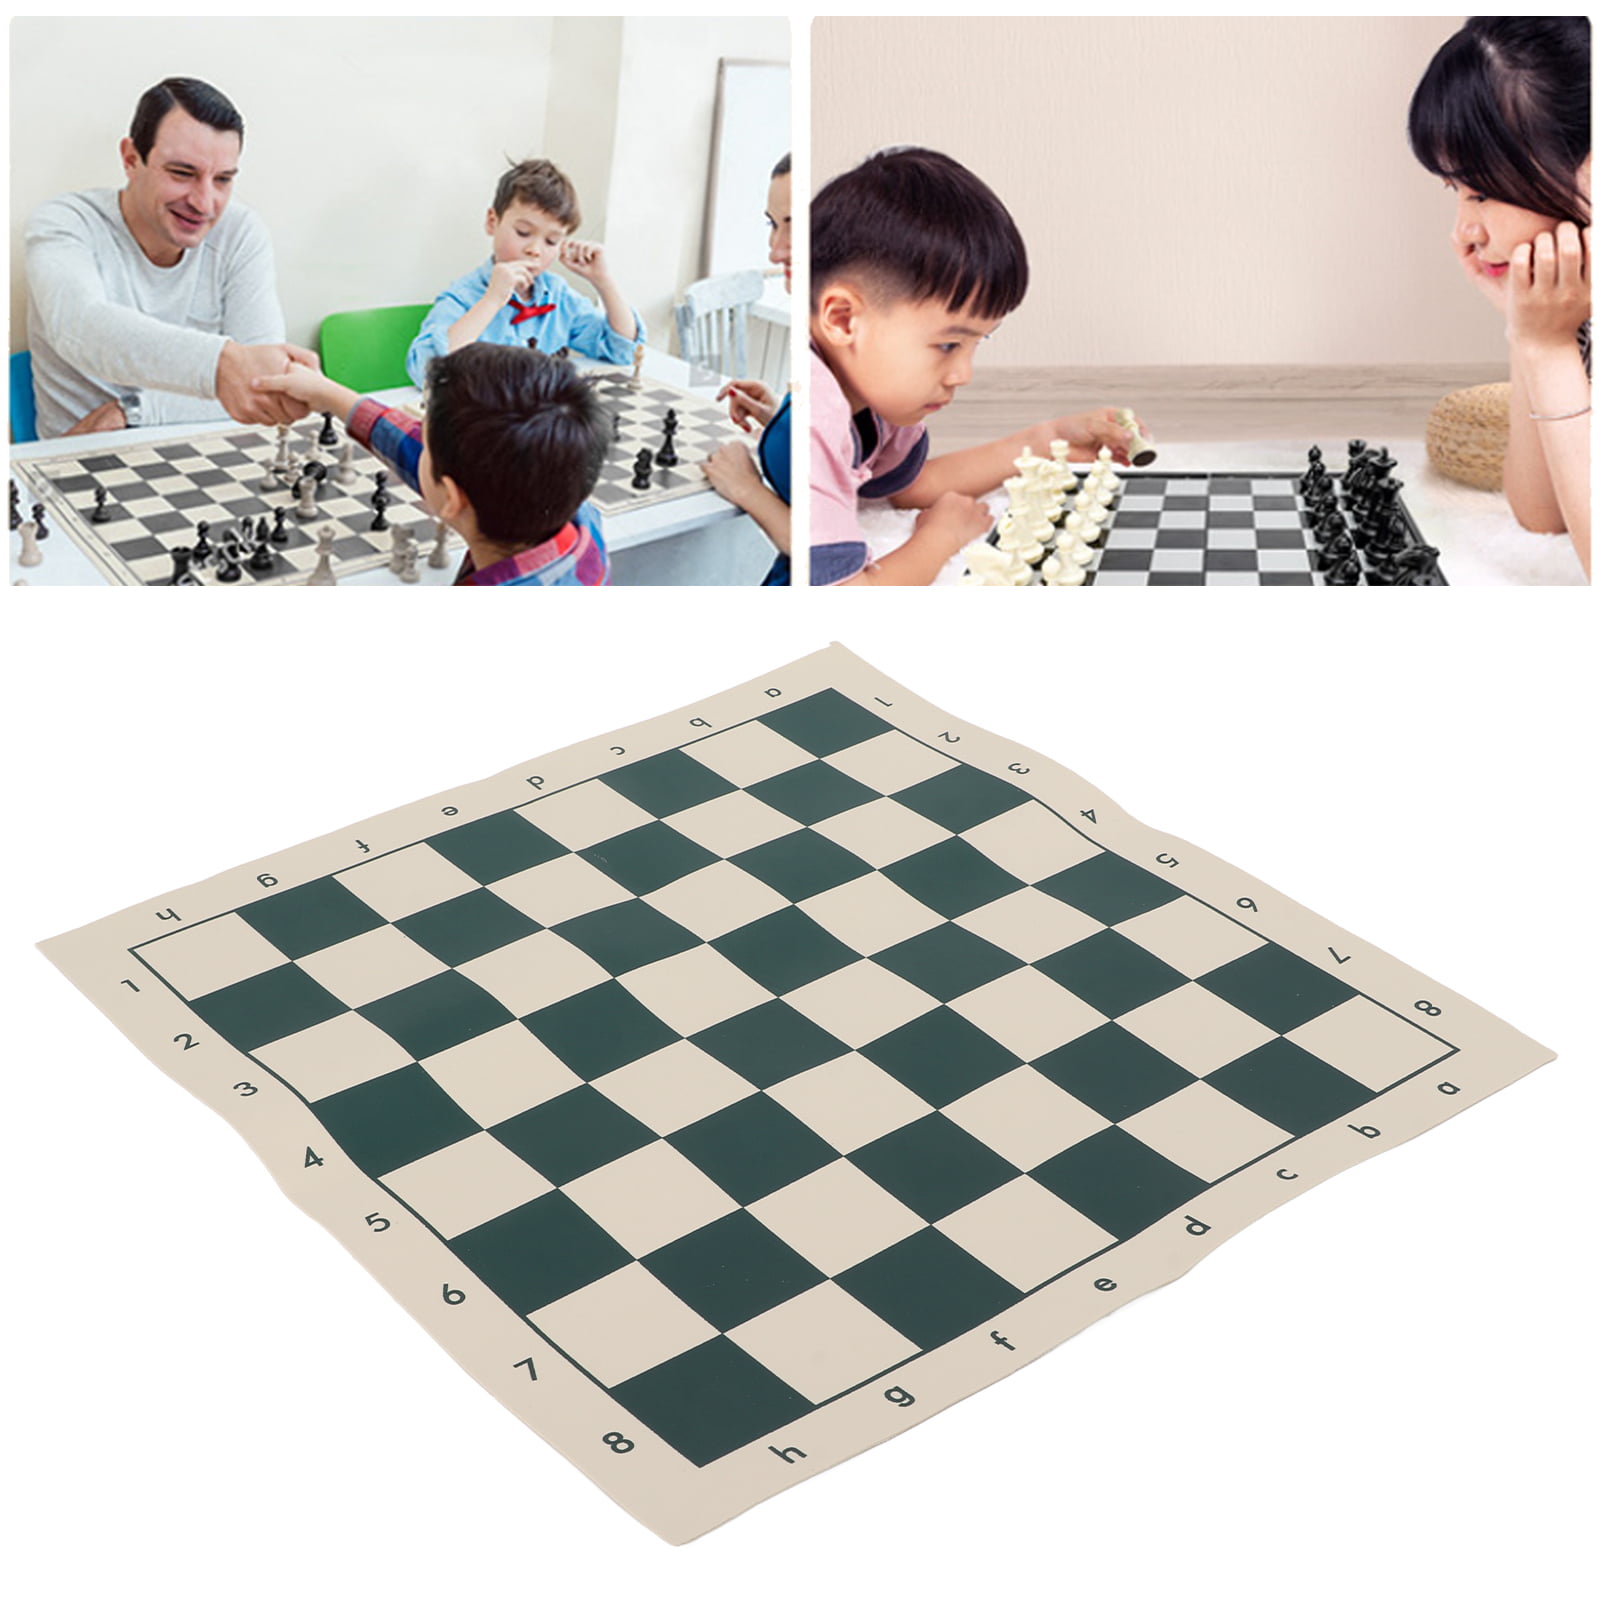 Super Portable Chessboard Flexible Material Chess Games Board For Kids Adults 